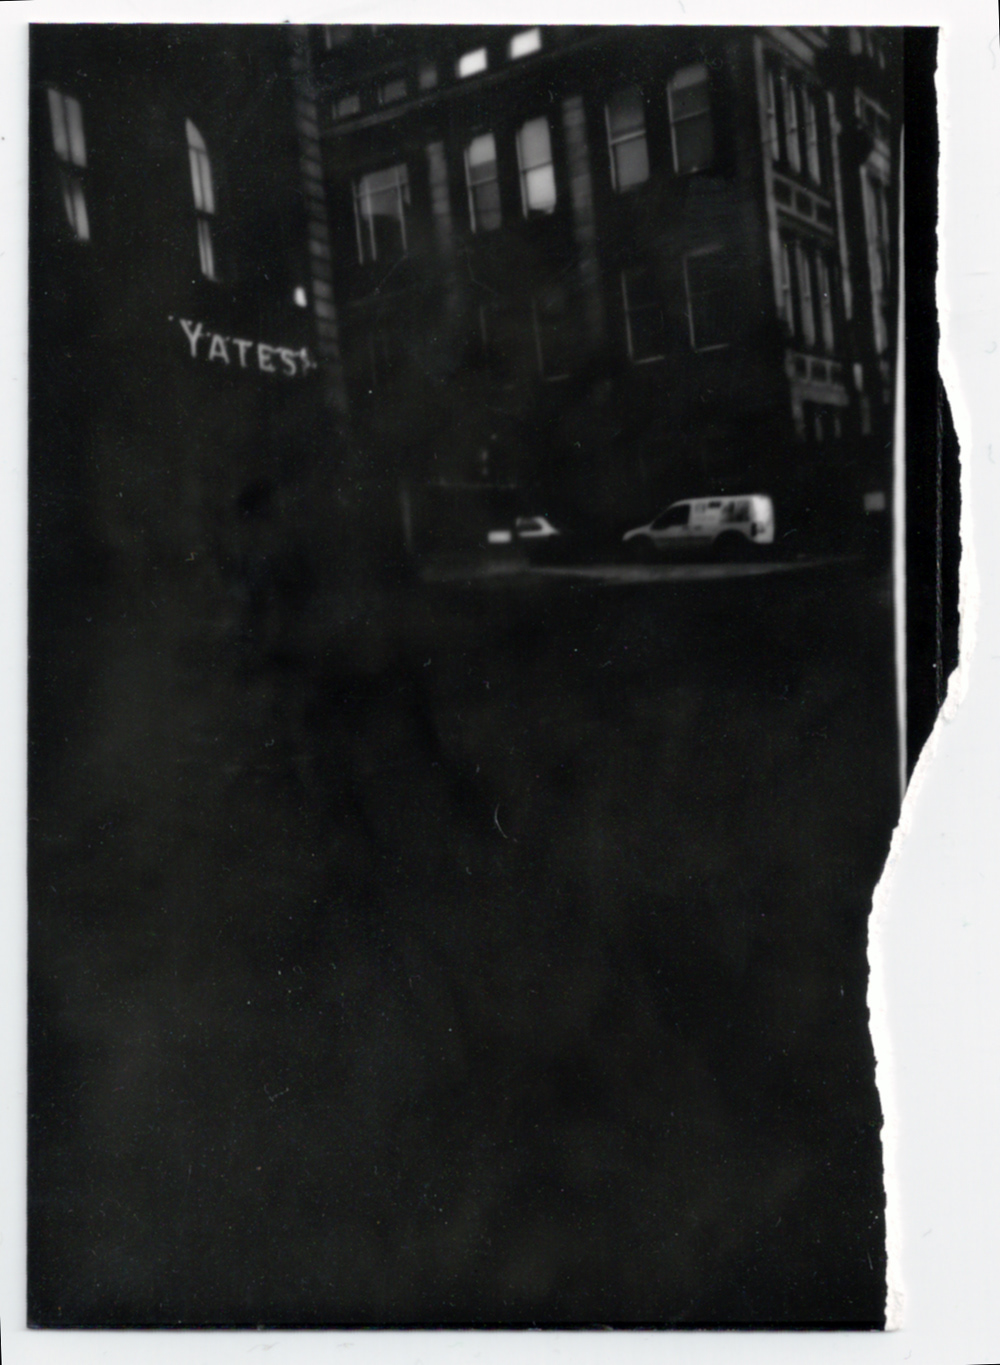 pin hole ryan brown leeds college of art and design 2011